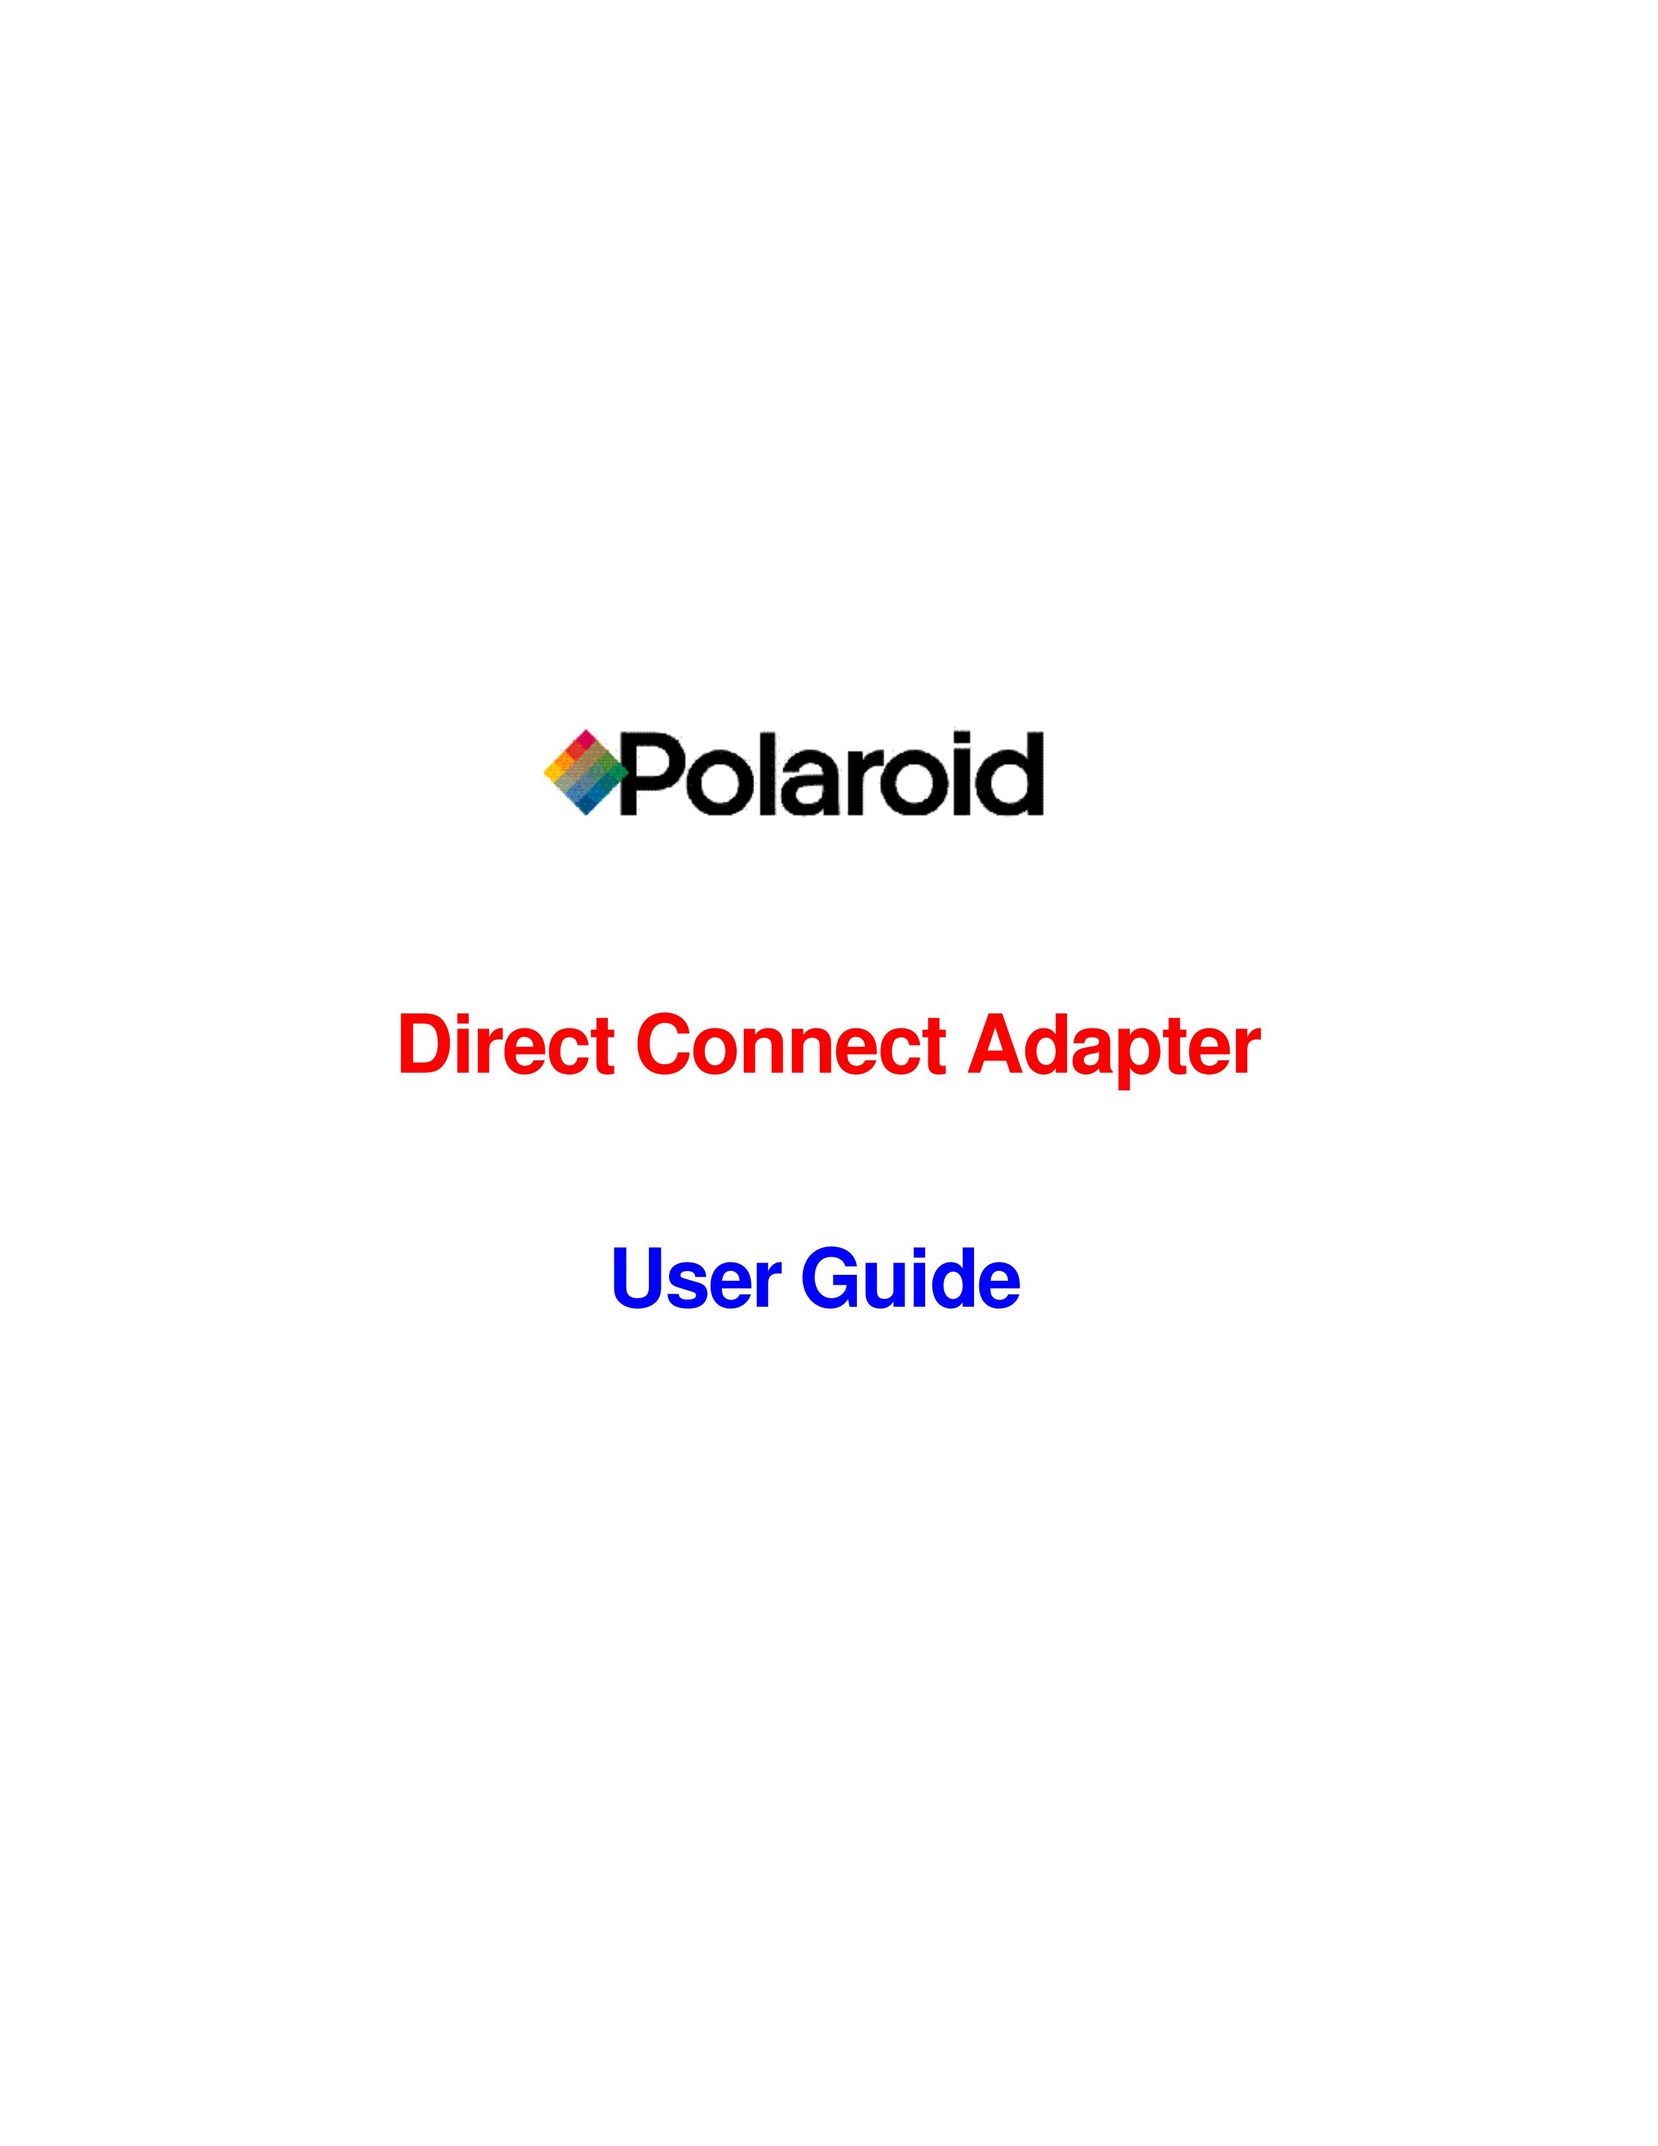 Polaroid Direct Connect Adapter Network Card User Manual